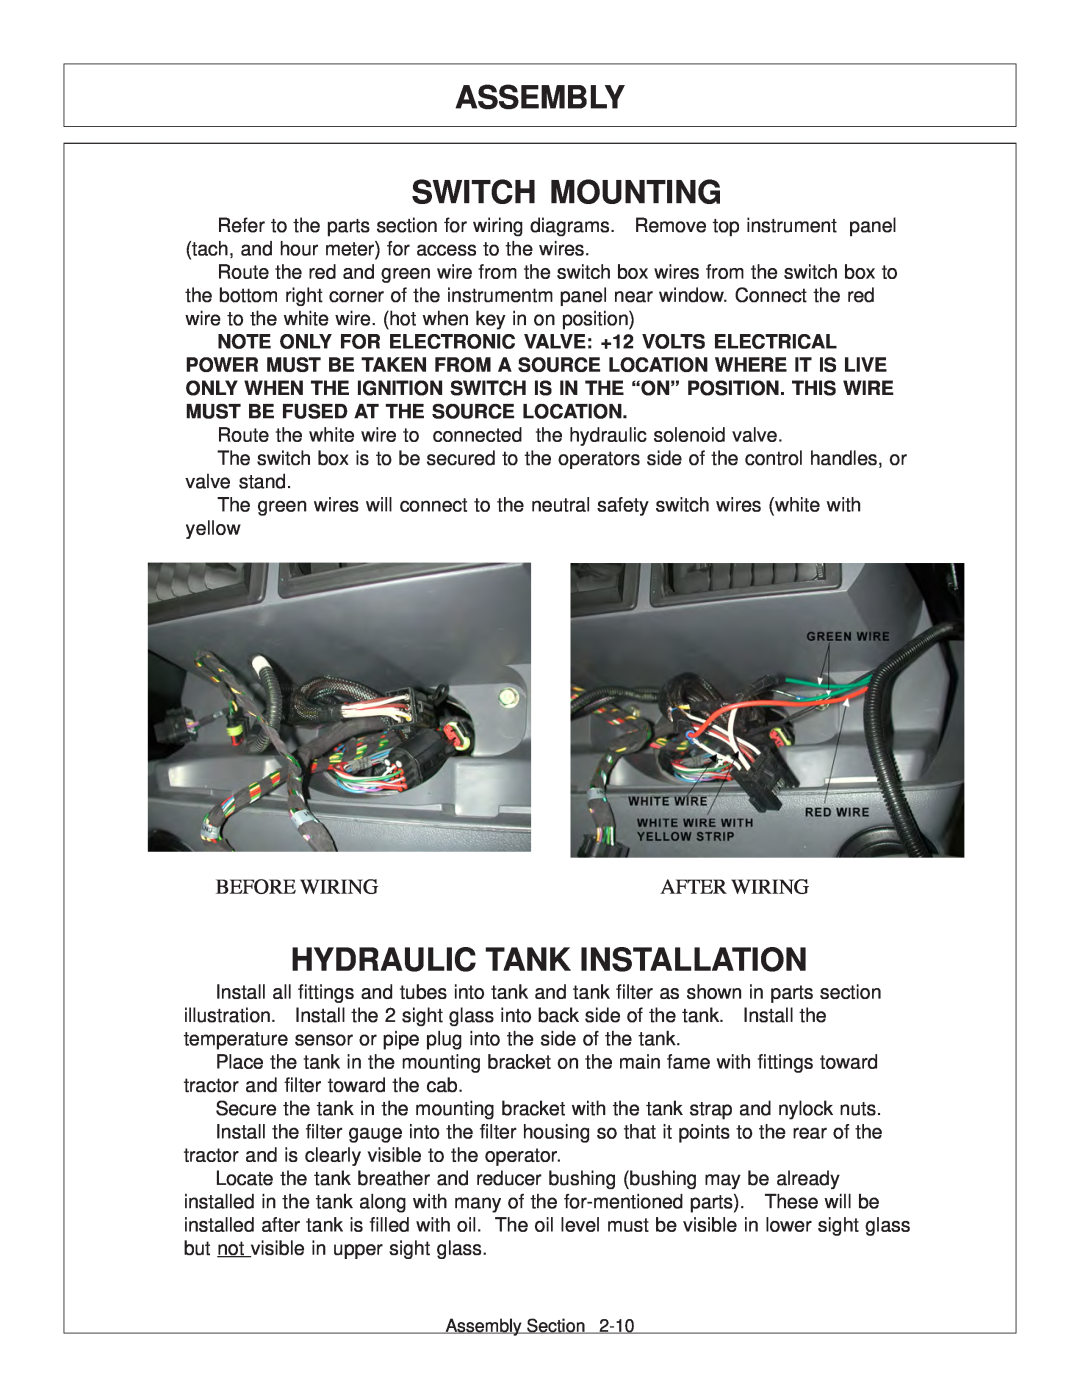 Tiger Products Co., Ltd TS 100A manual Switch Mounting, Hydraulic Tank Installation, Assembly, Before Wiring, After Wiring 